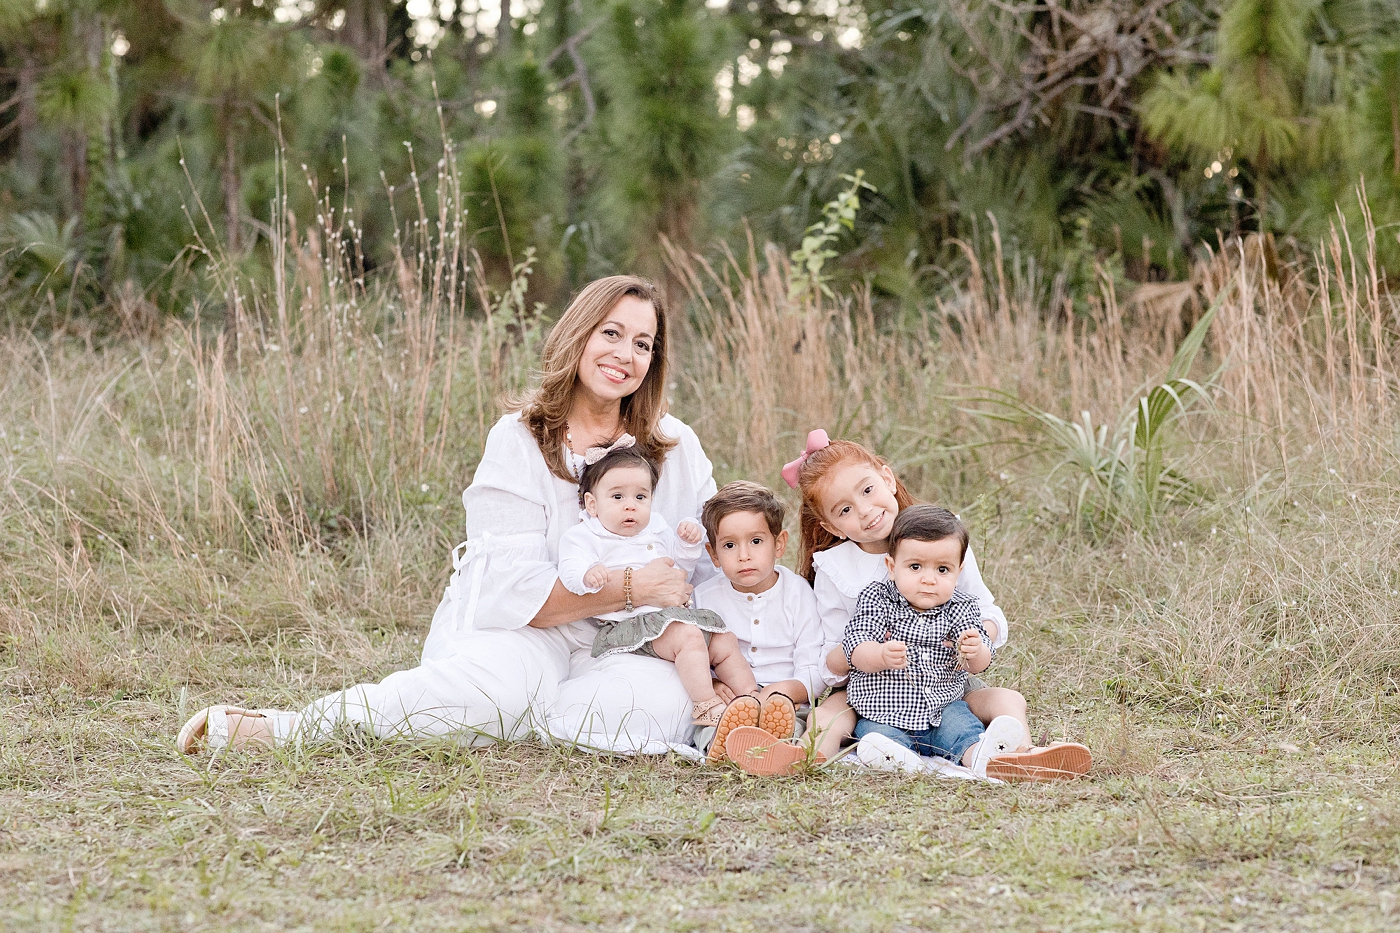 Grandmother sits with grandchildren during Miami family session. Photo by Ivanna Vidal Photography.